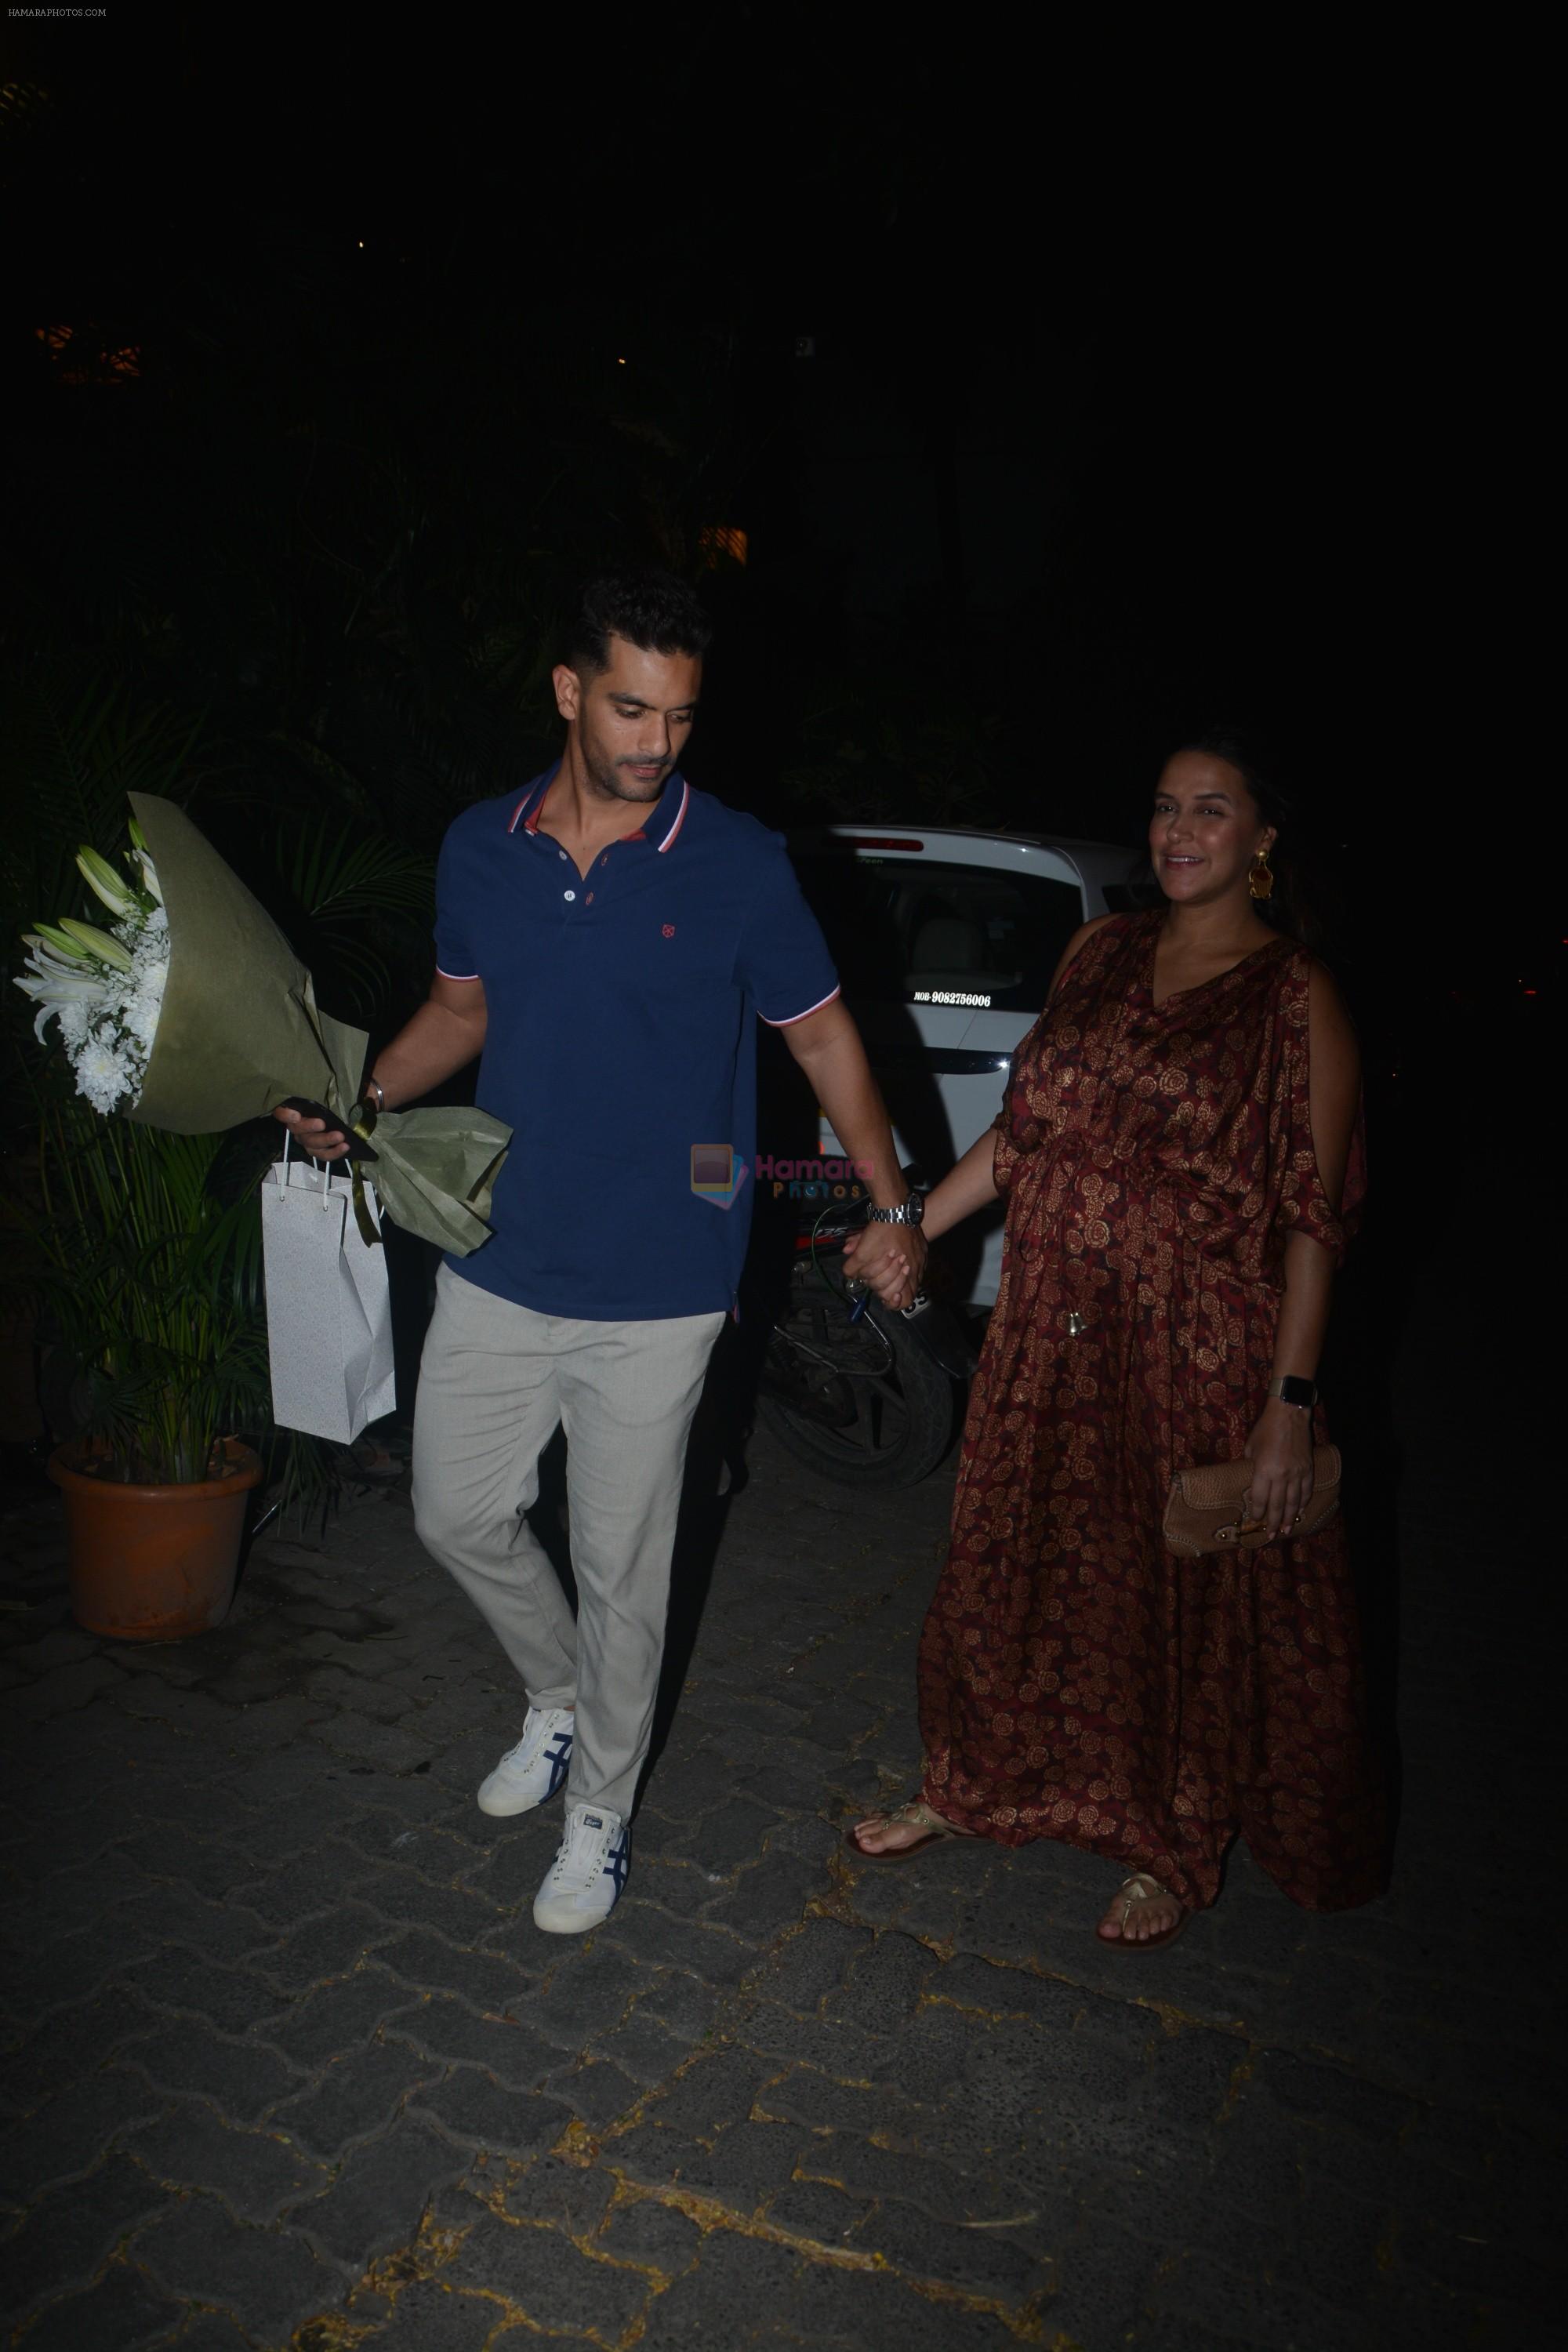 Neha Dhupia, Angad Bedi Spotted At Sophie Choudry's House In Bandra on 23rd Oct 2018